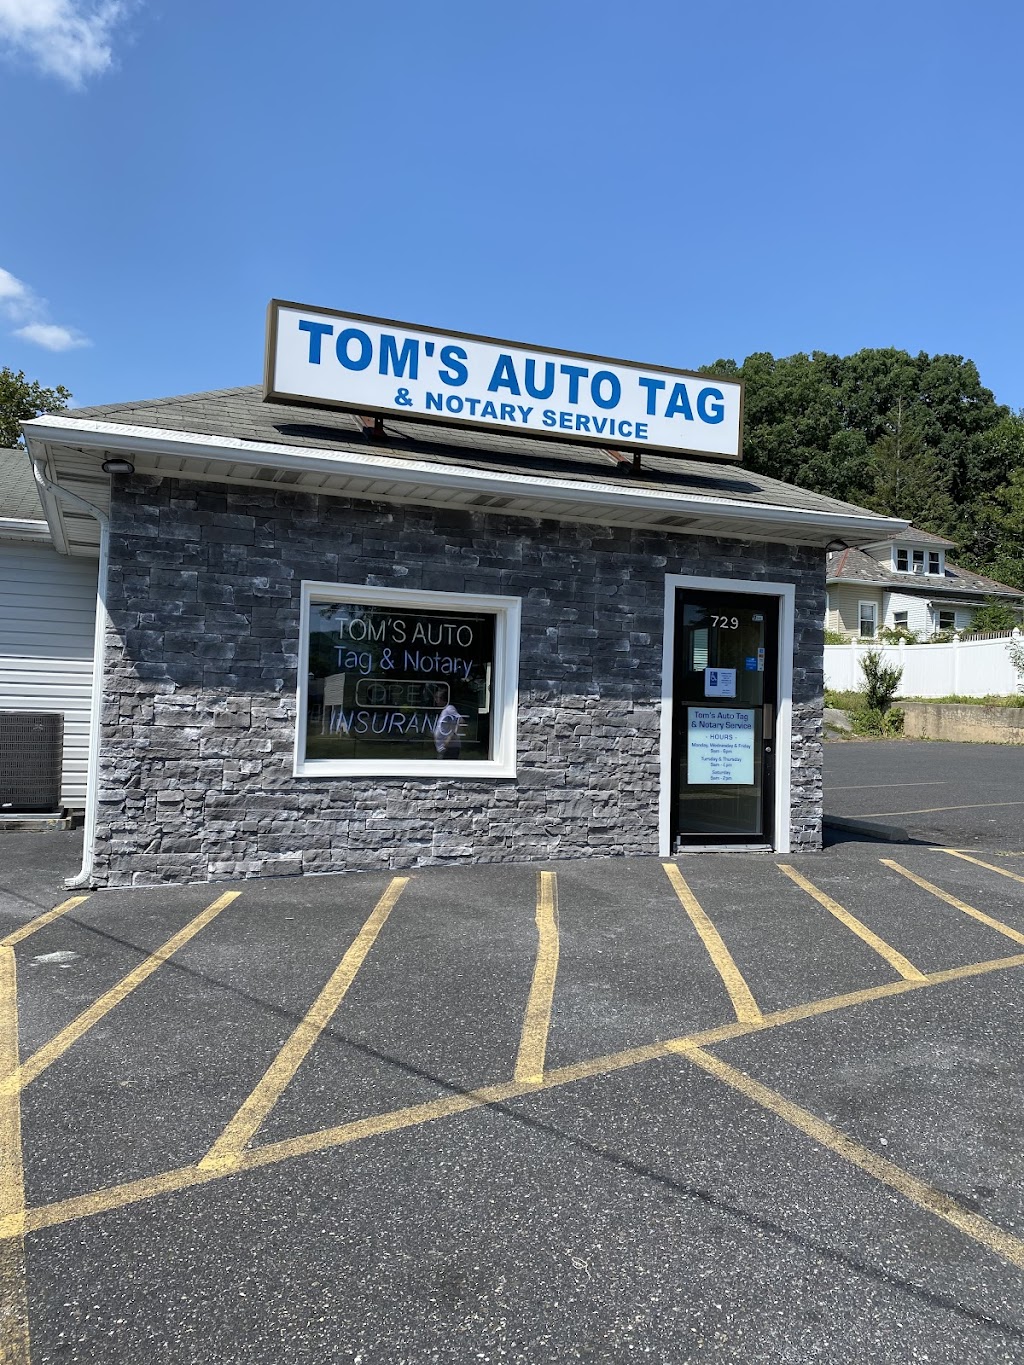 Toms Auto Tag and Notary Service | 729 E Susquehanna St, Allentown, PA 18103 | Phone: (610) 791-1260